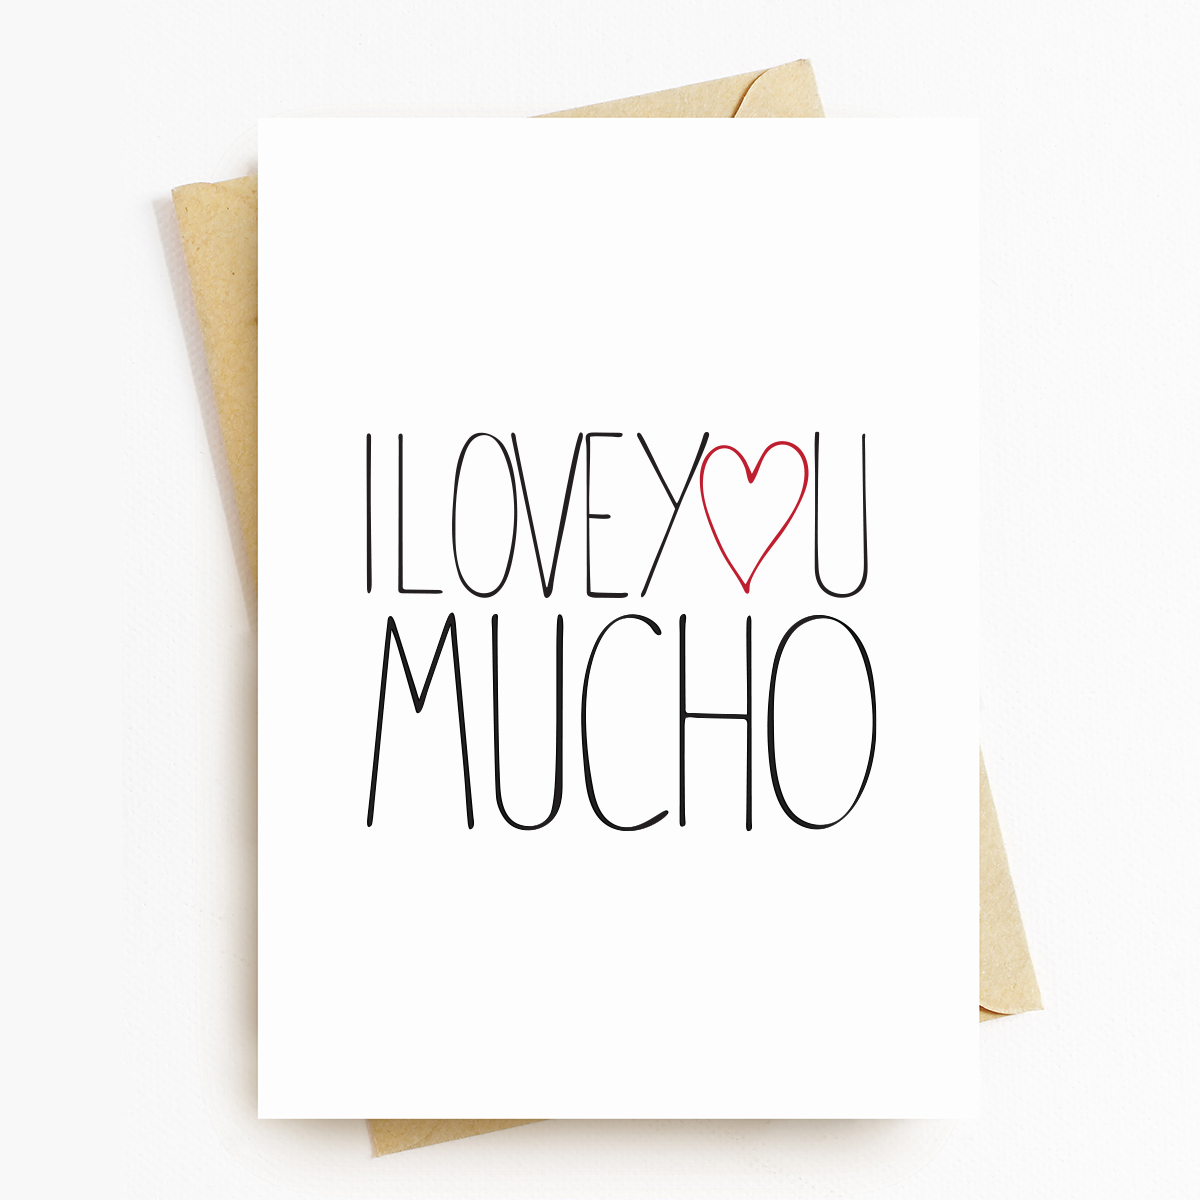 "I Love You Mucho" Motivational Greeting Card